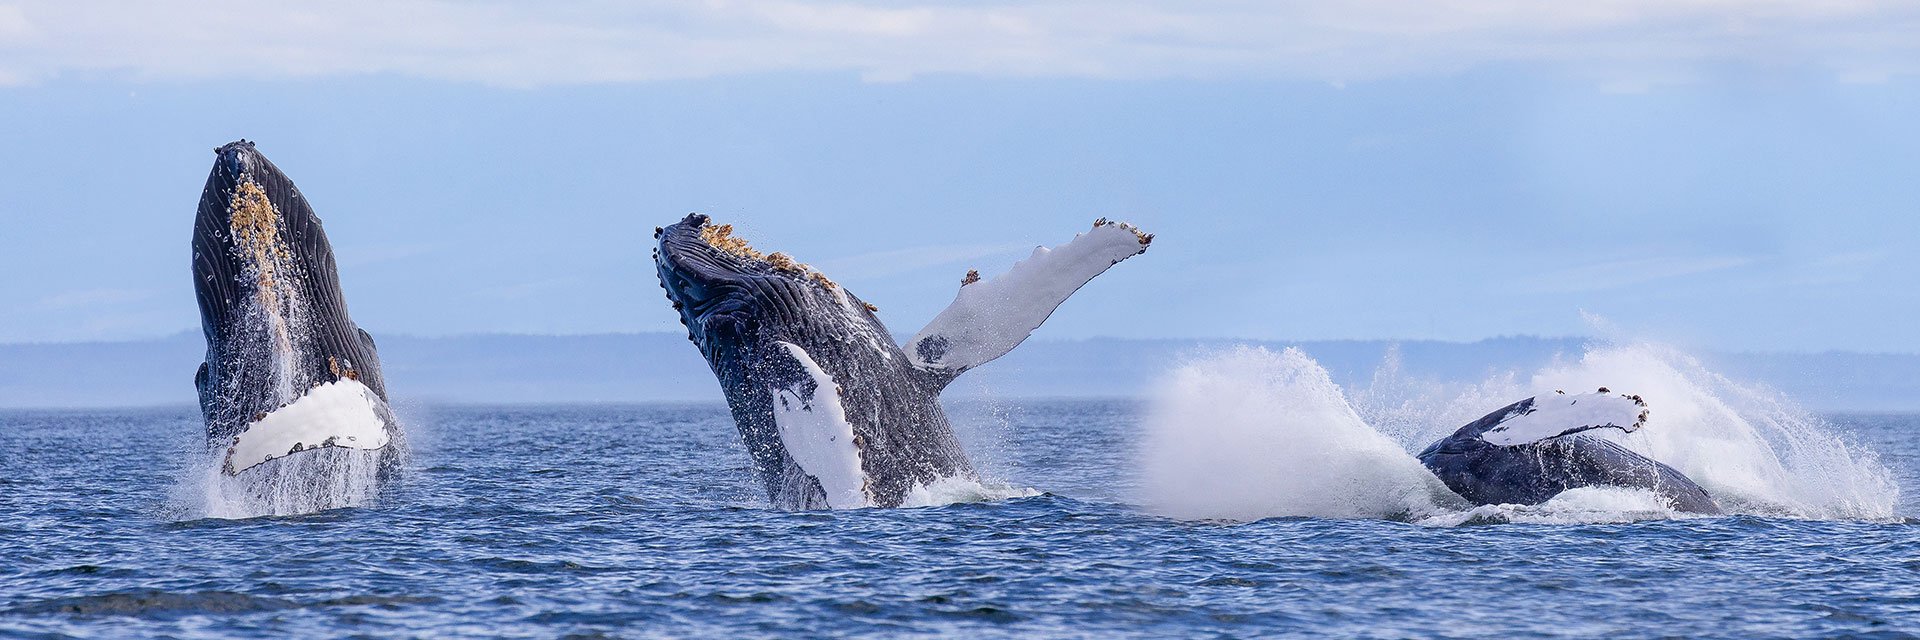 whale watching tour discount